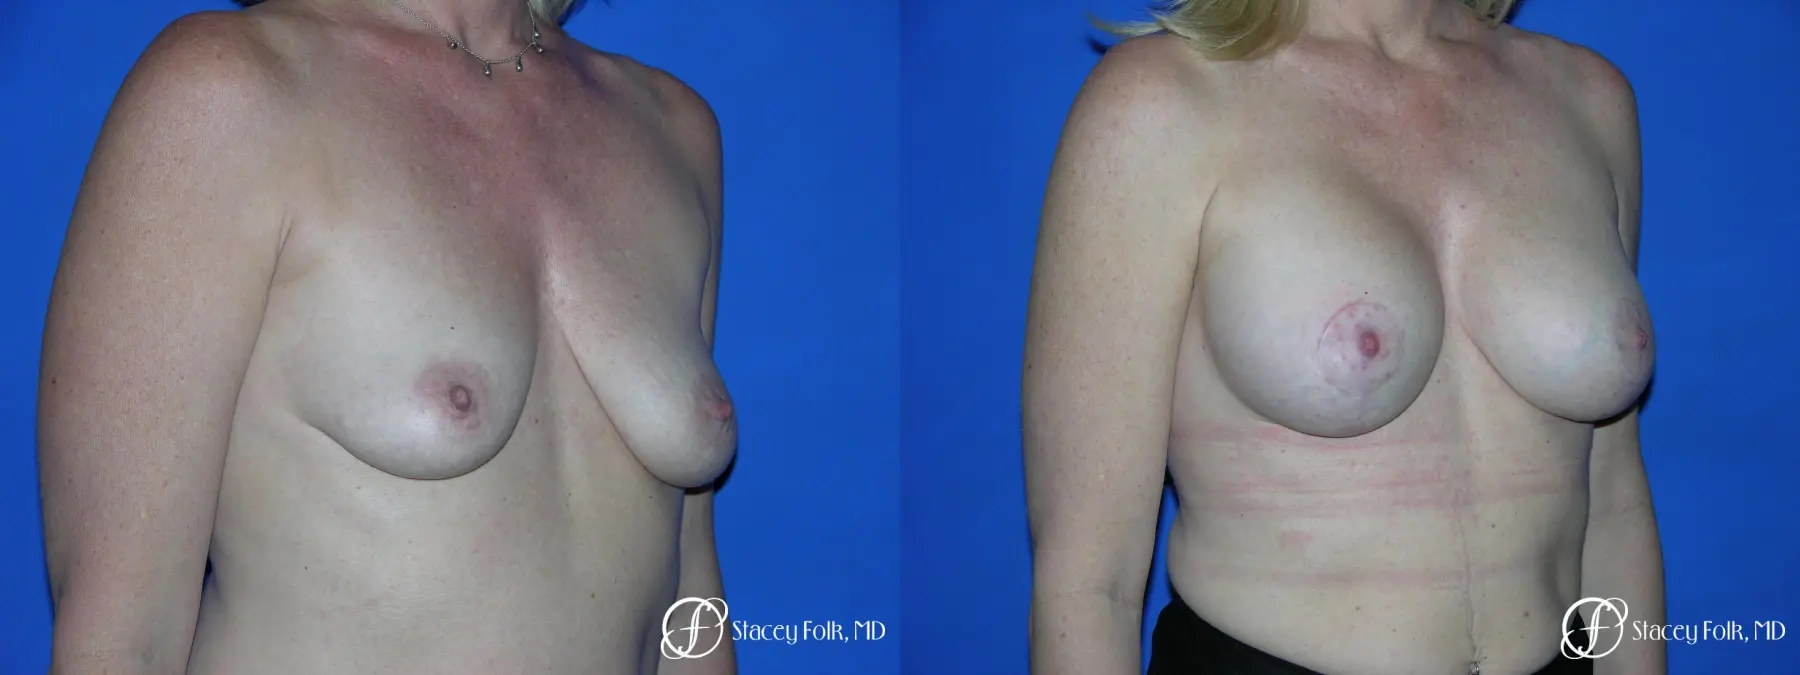 Denver Breast Lift and Augmentation 4555 - Before and After 2